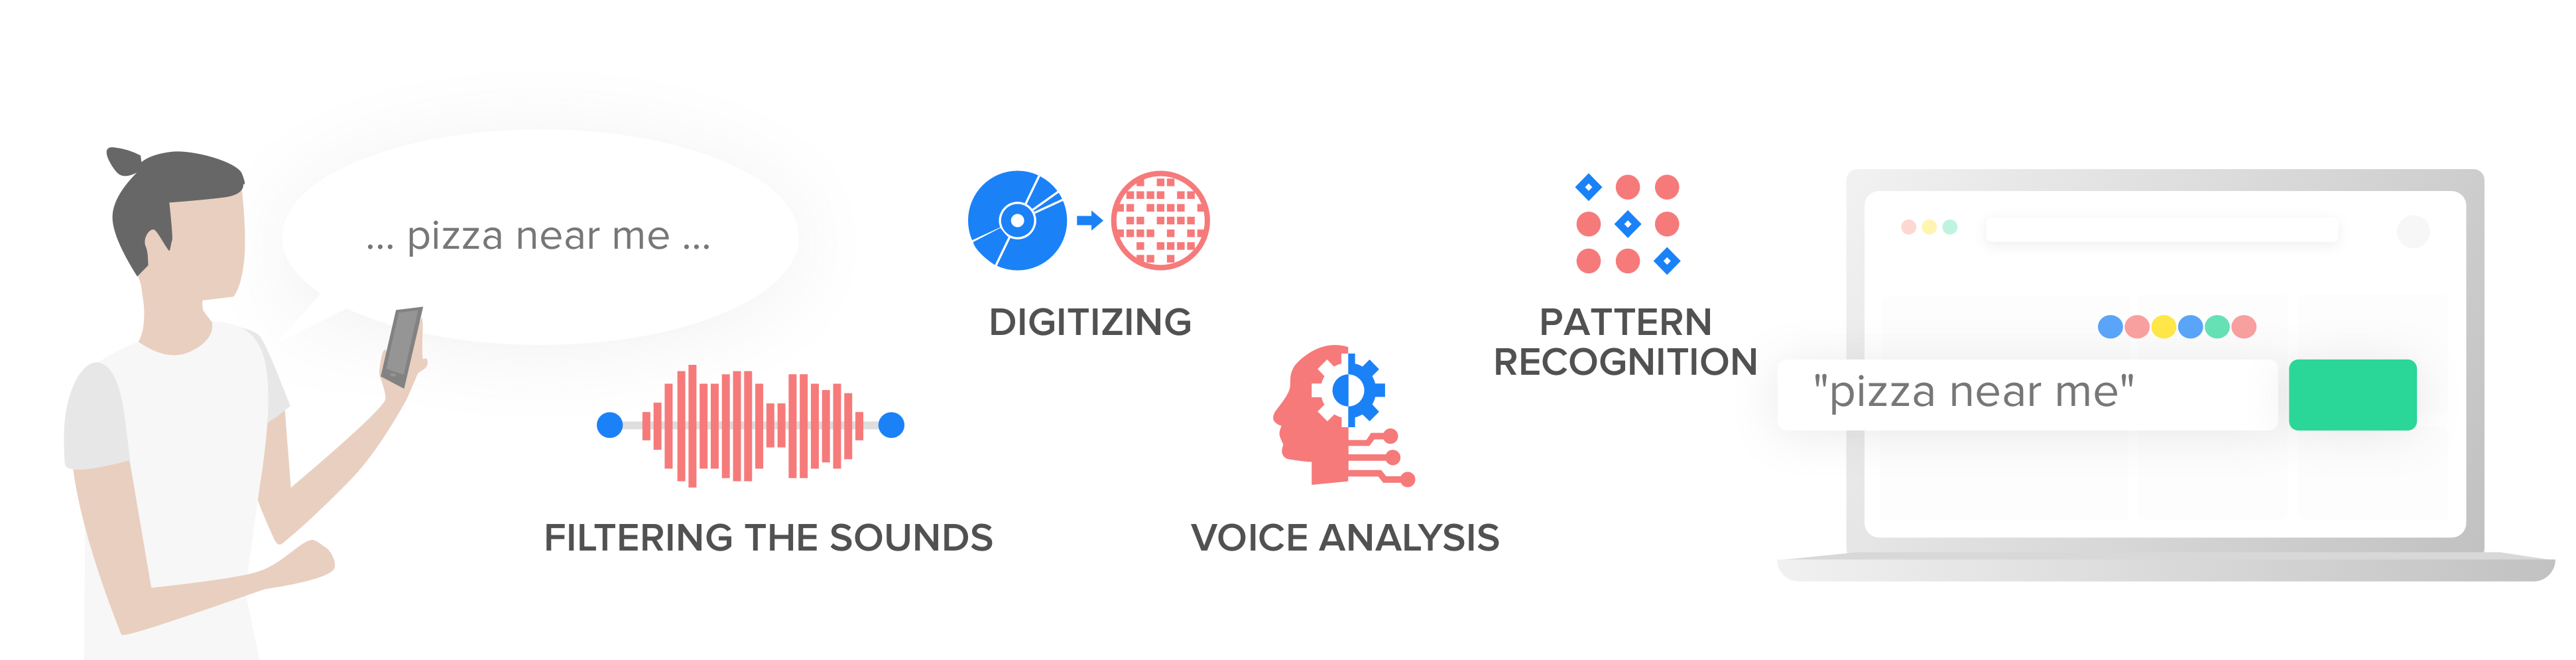 Phases of speech recognition